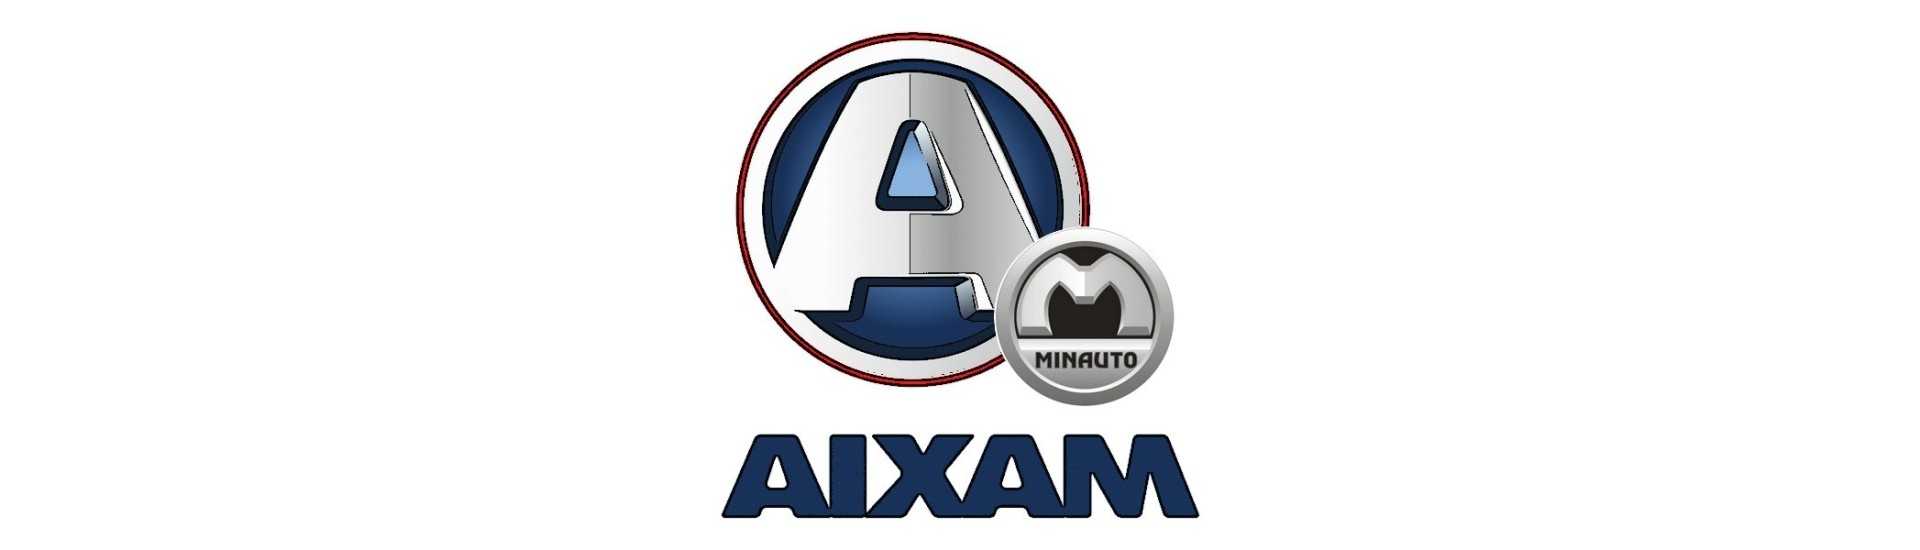 Plastic at the best price for car without a permit Aixam Minauto